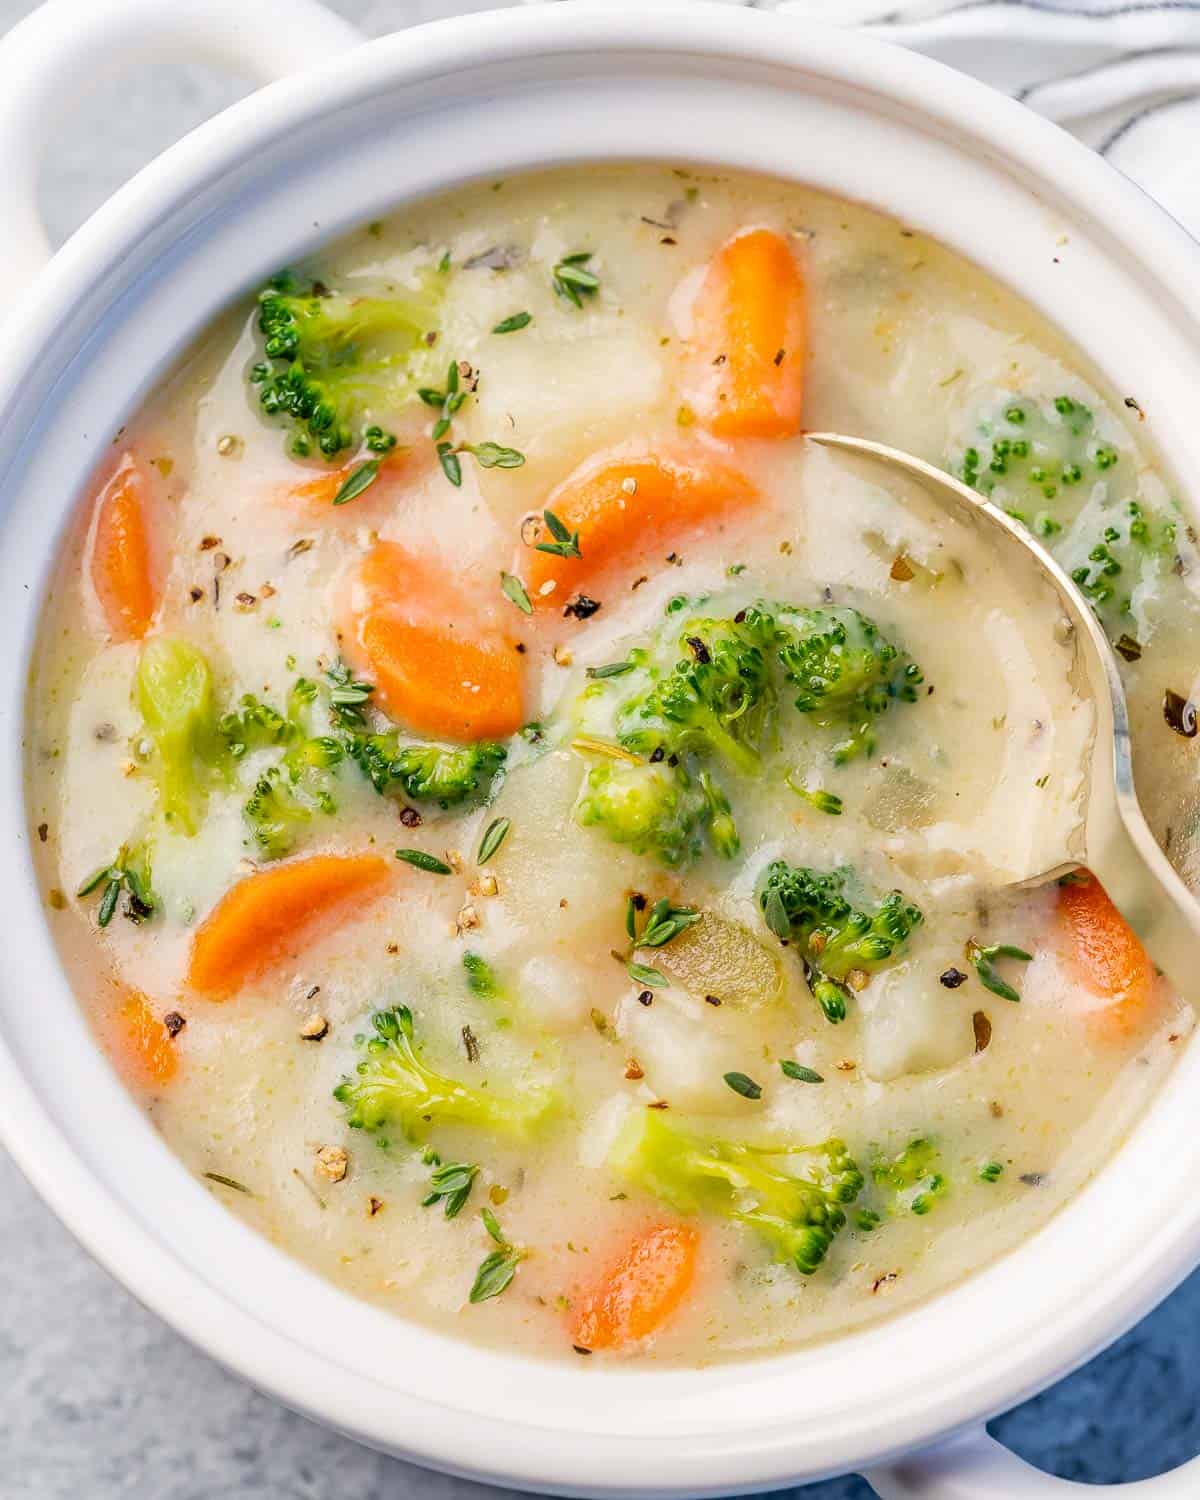 Soup with broccoli, carrots and potatoes in a creamy broth.